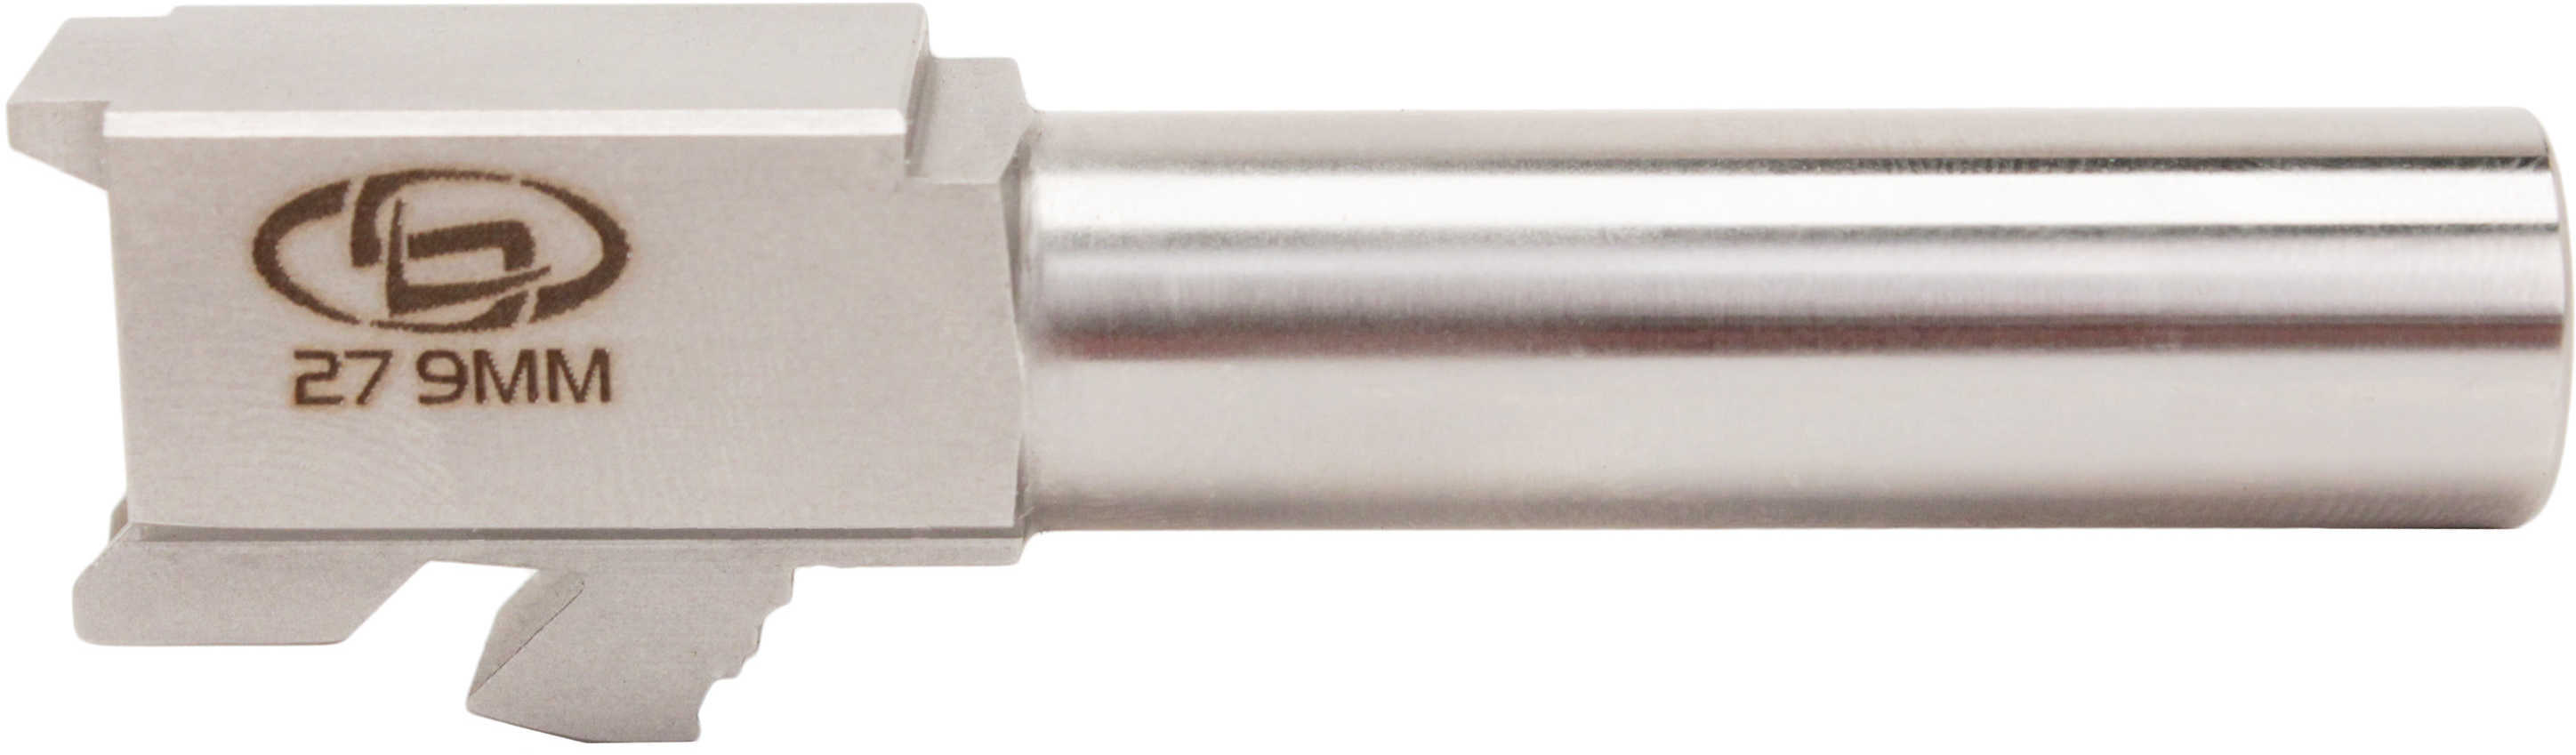 Storm Lake Barrels 9MM 3.46" Fits Glock 27 Stainless Finish Conversion Converts 40 S&W To